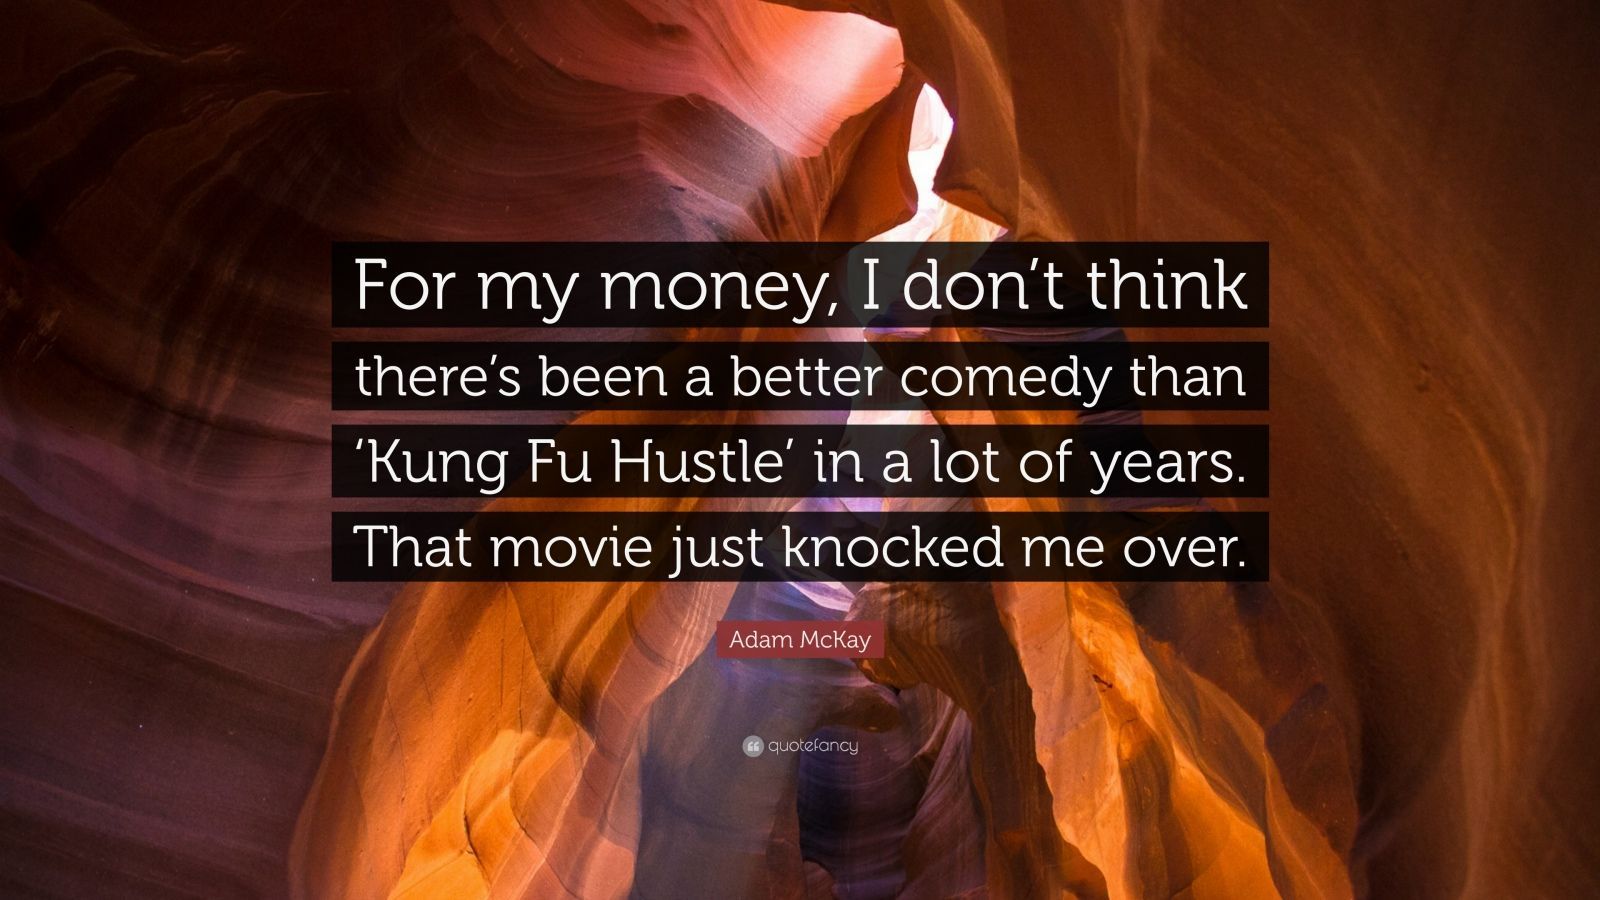 Adam McKay Quote: “For my money, I don't think there's been a better comedy than 'Kung Fu Hustle' in a lot of years. That movie just knocke.” (7 wallpaper)